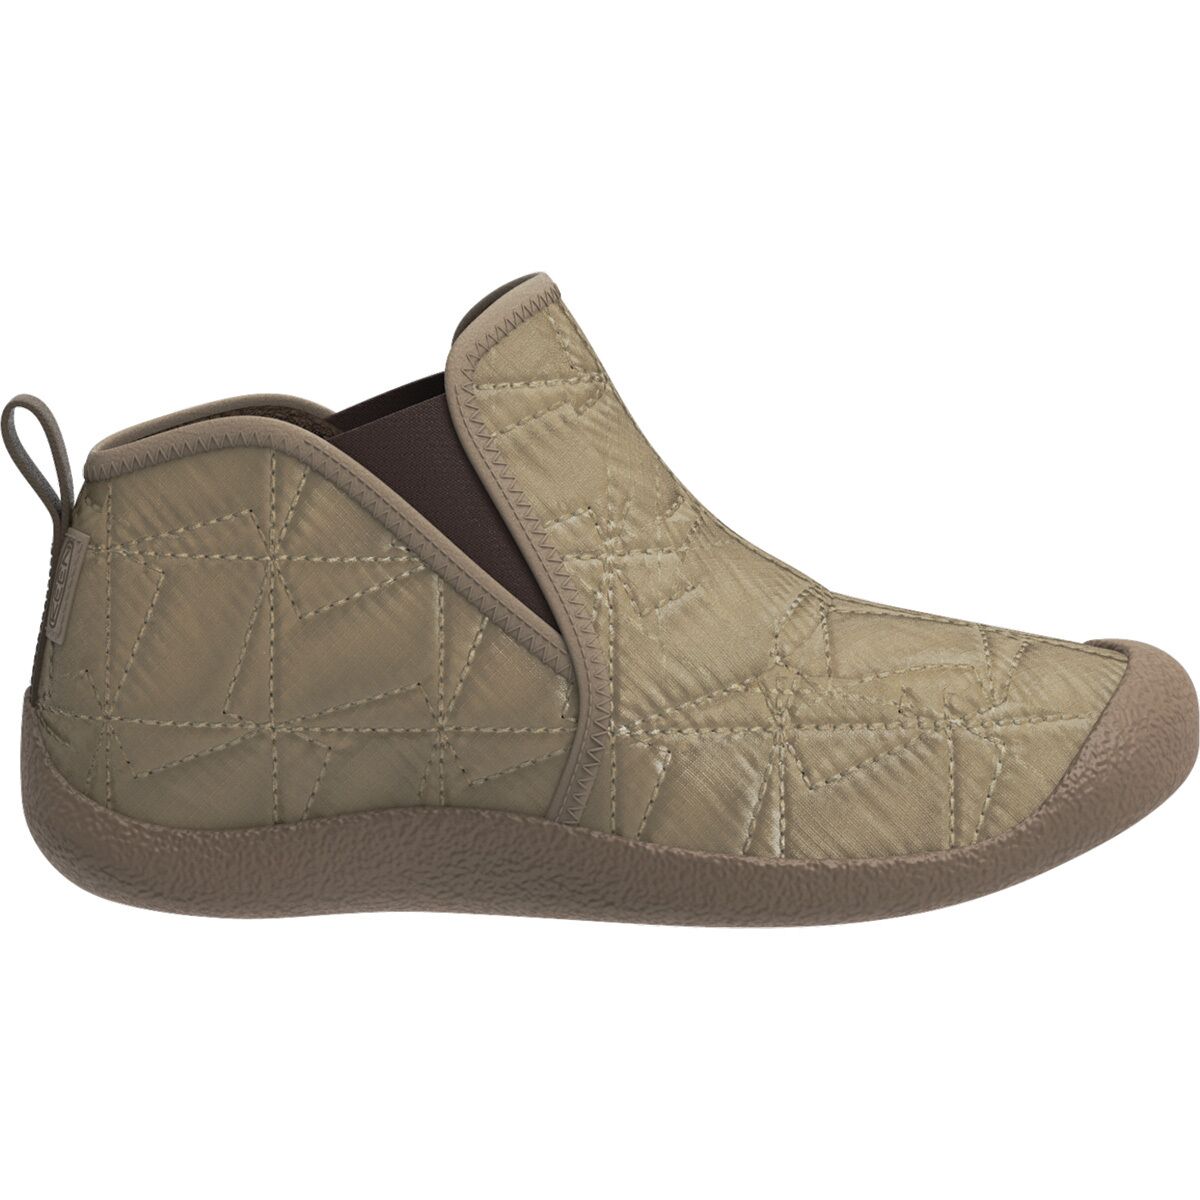 Howser Ankle Boot - Women